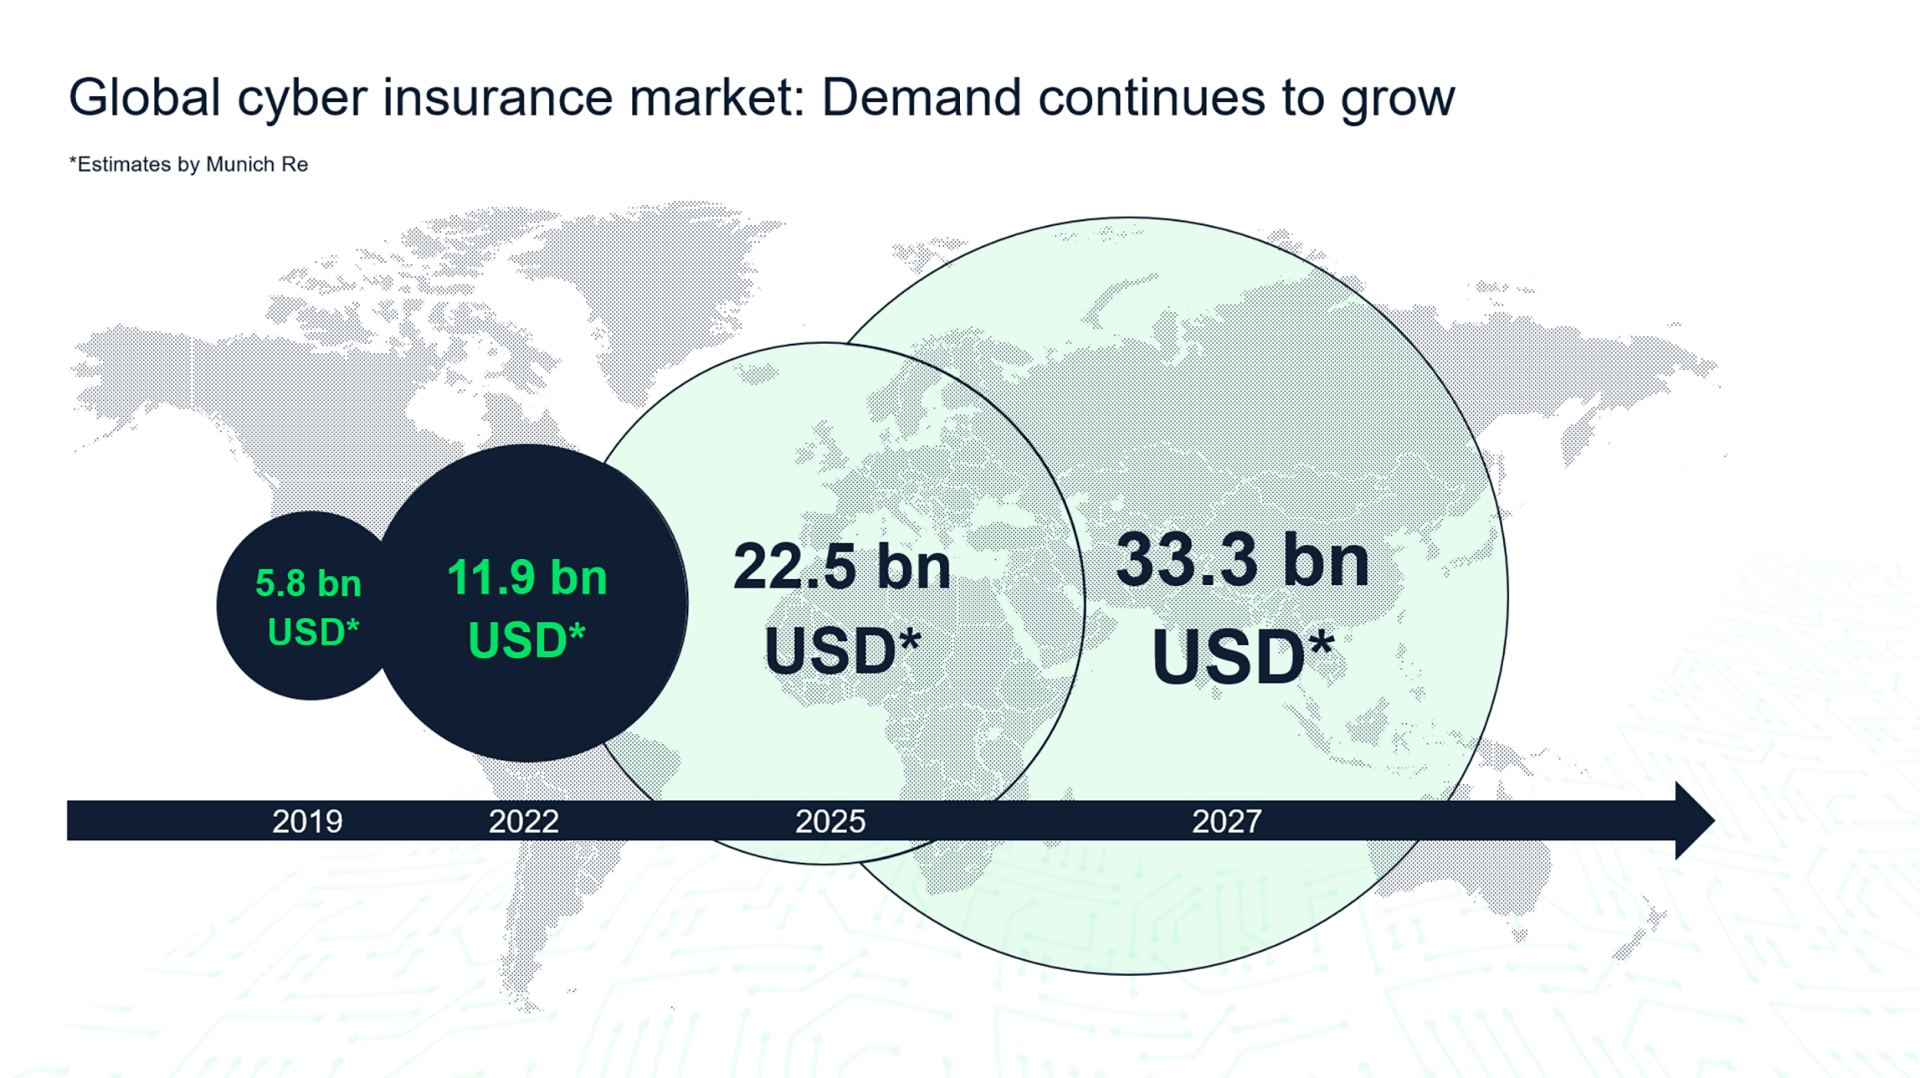 Global cyber insurance market: Demand continues to grow